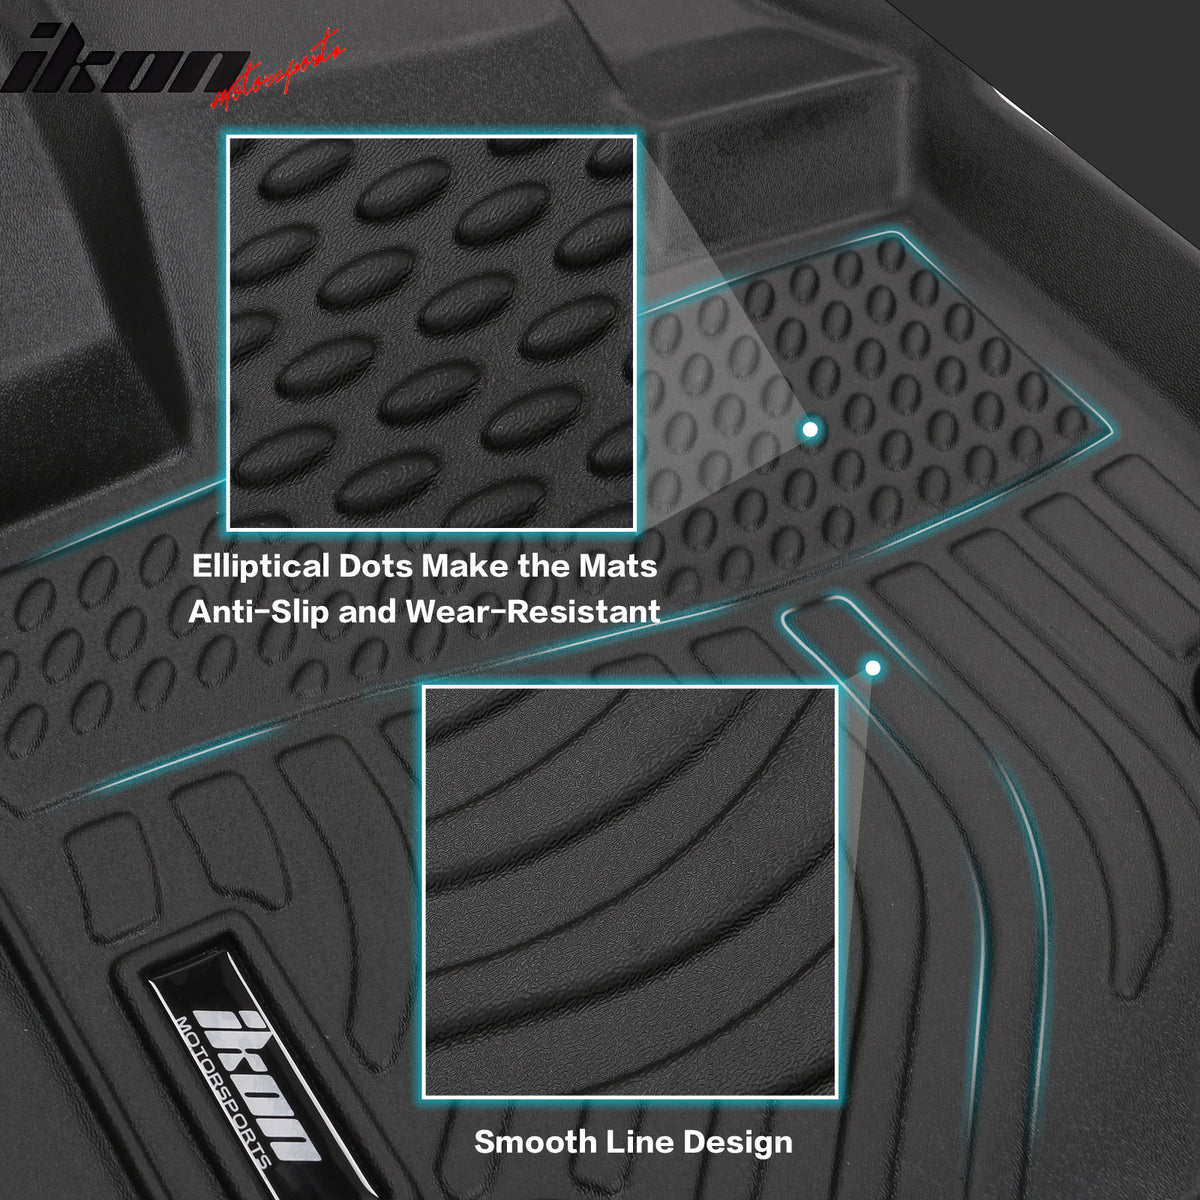 IKON MOTORSPORTS 3D TPE Floor Mats, Compatible with 2009-2014 Ford F-150 Super Crew Cab, All Weather Waterproof Anti-Slip Liners, Front & 2nd Row Full Set Car Accessories, Black